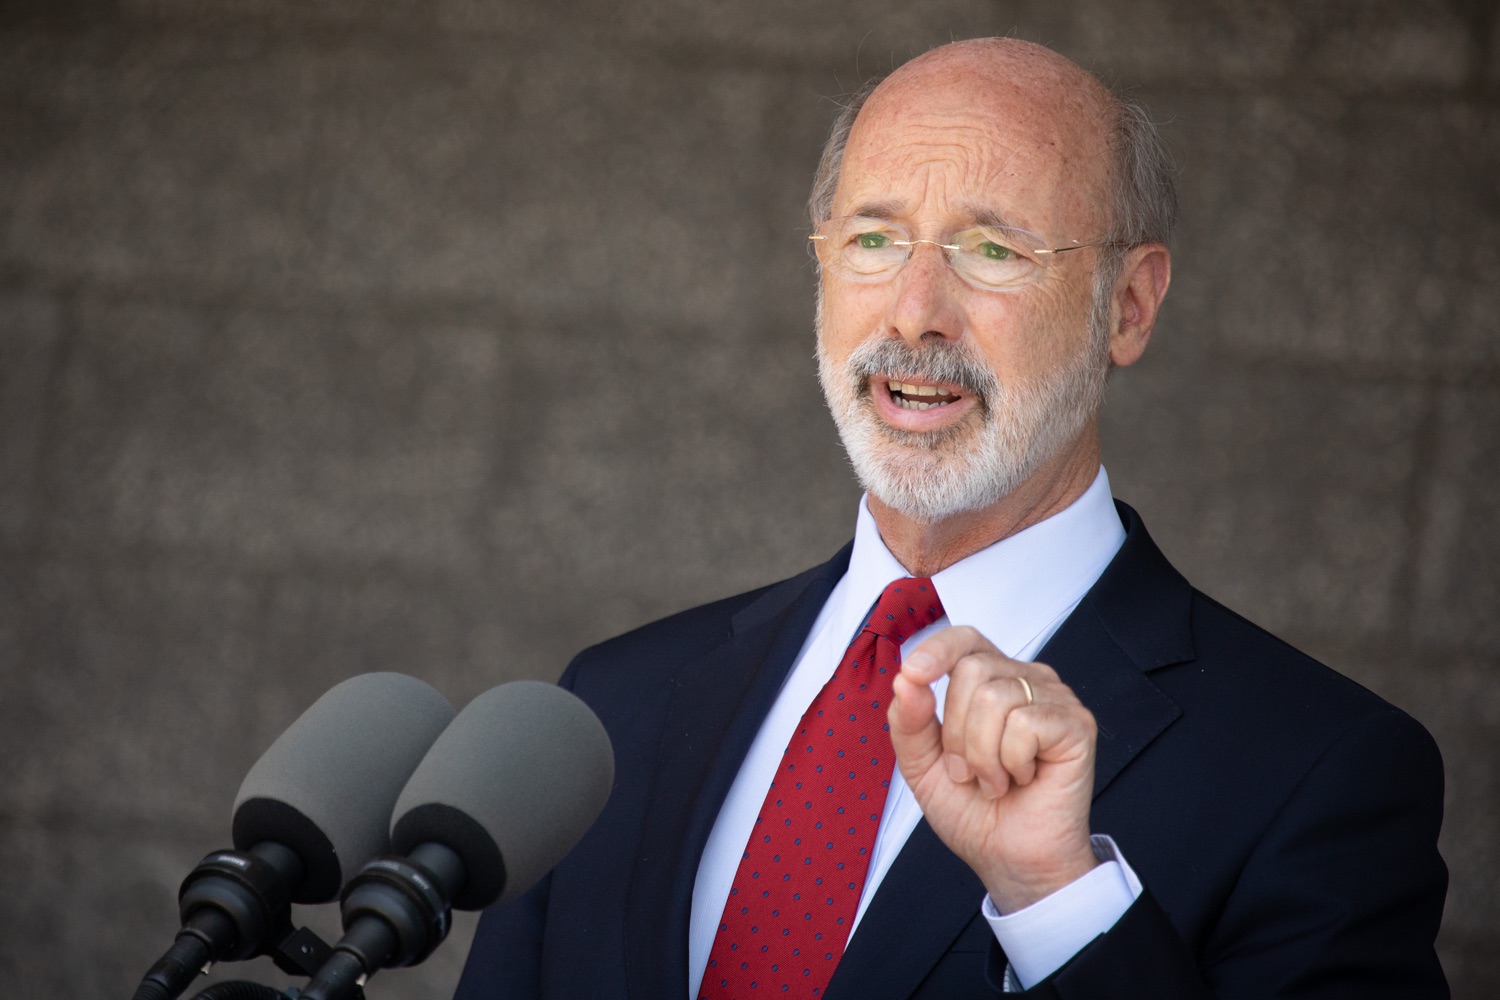 Pennsylvania Governor Tom Wolf speaking with the press.  Governor Tom Wolf visited the child care center at PSECU headquarters in Harrisburg today to announce $53 million in additional financial support for child care providers that have suffered during COVID-19.  Harrisburg, PA  July 6, 2020..<br><a href="https://filesource.amperwave.net/commonwealthofpa/photo/18143_gov_cares_dz_02.jpg" target="_blank">⇣ Download Photo</a>